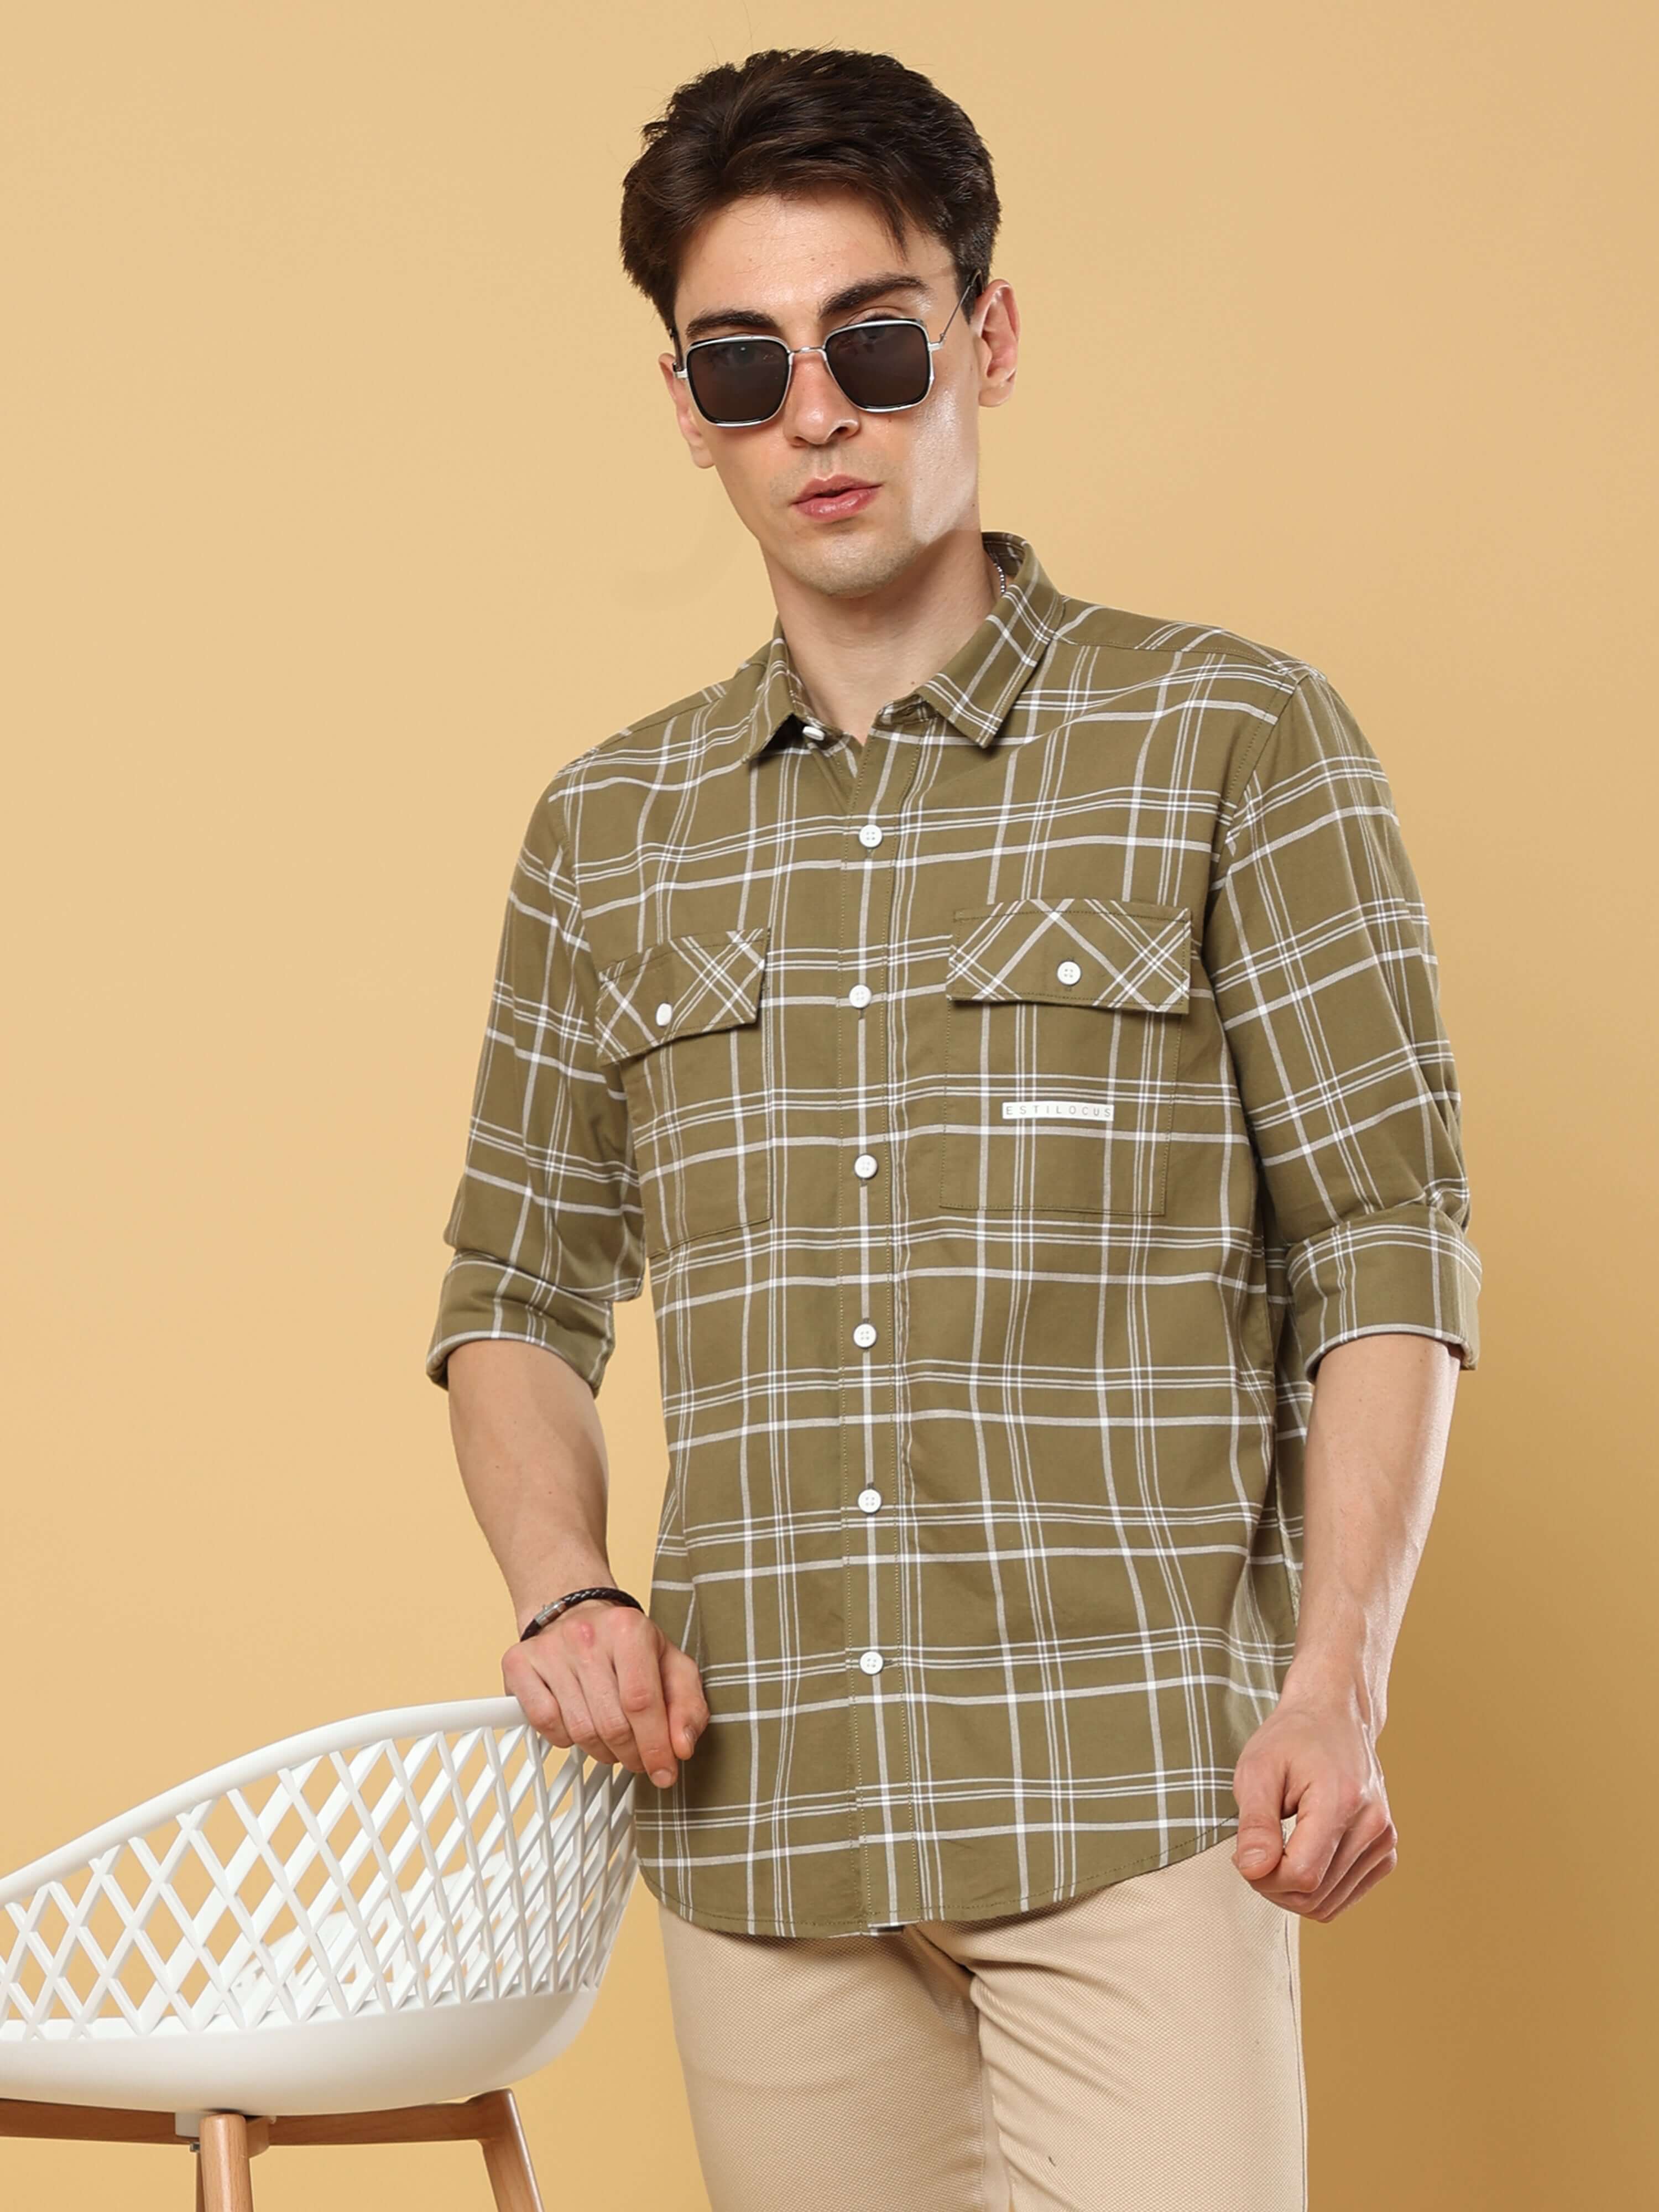 Ochre Green Solid Double Pocket Shirt shop online at Estilocus. • 100% premium cotton• Full-sleeve check shirt• All over print pattern• Regular collar• Double button round cuff's.• Double pocket with flap• Curved hemline• All single needle construction, f